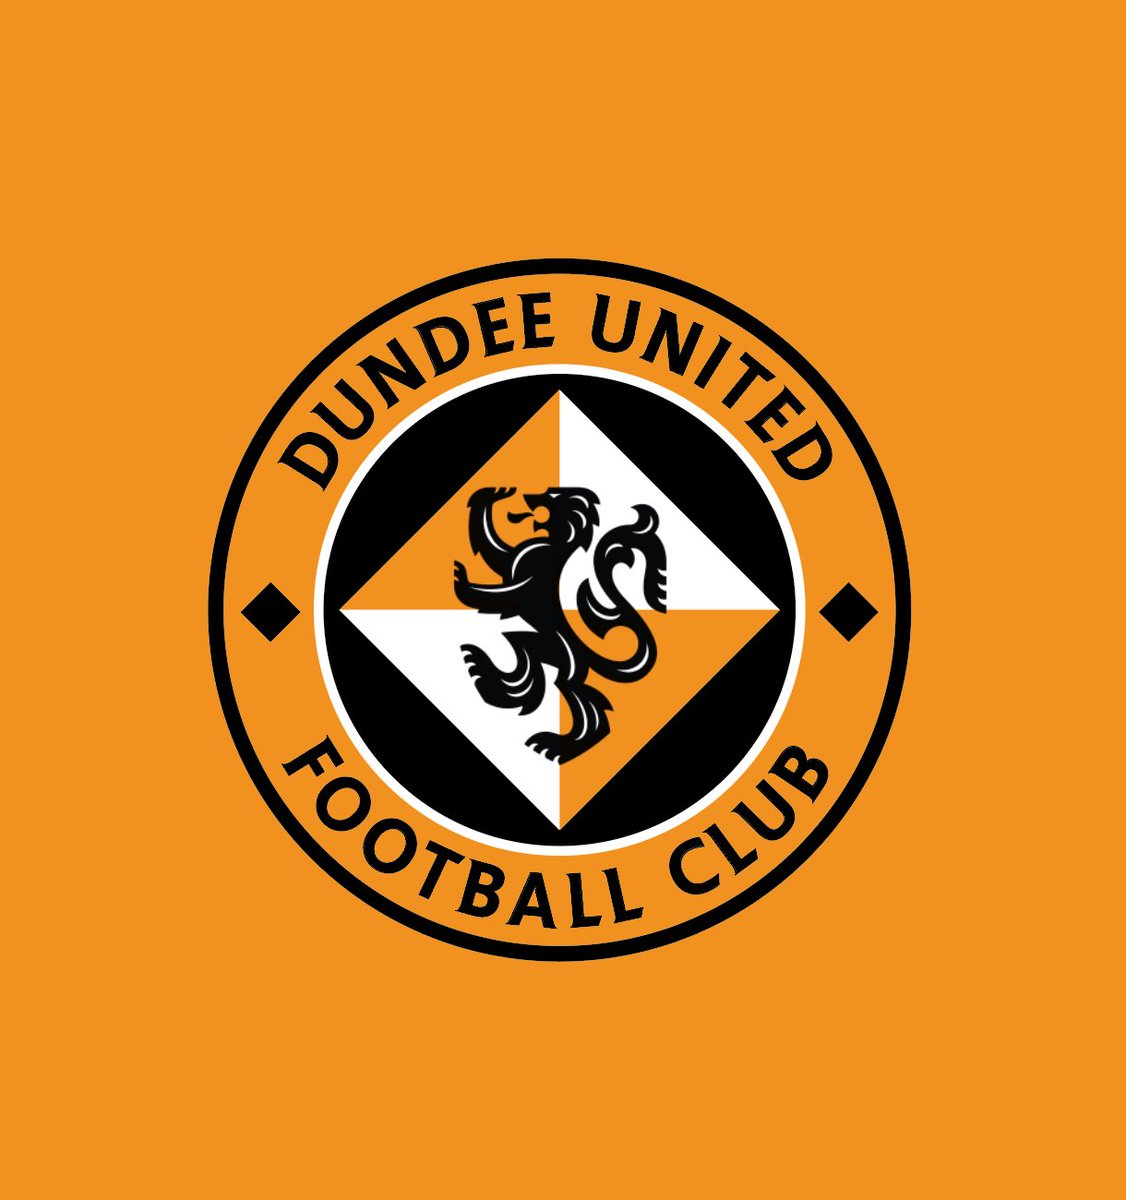 Gary Austin on Twitter: "Dundee United logo concept. What do you reckon  @dundeeunitedfc? #dundeeunited #arabs #ForeverTangerine #dufc… "